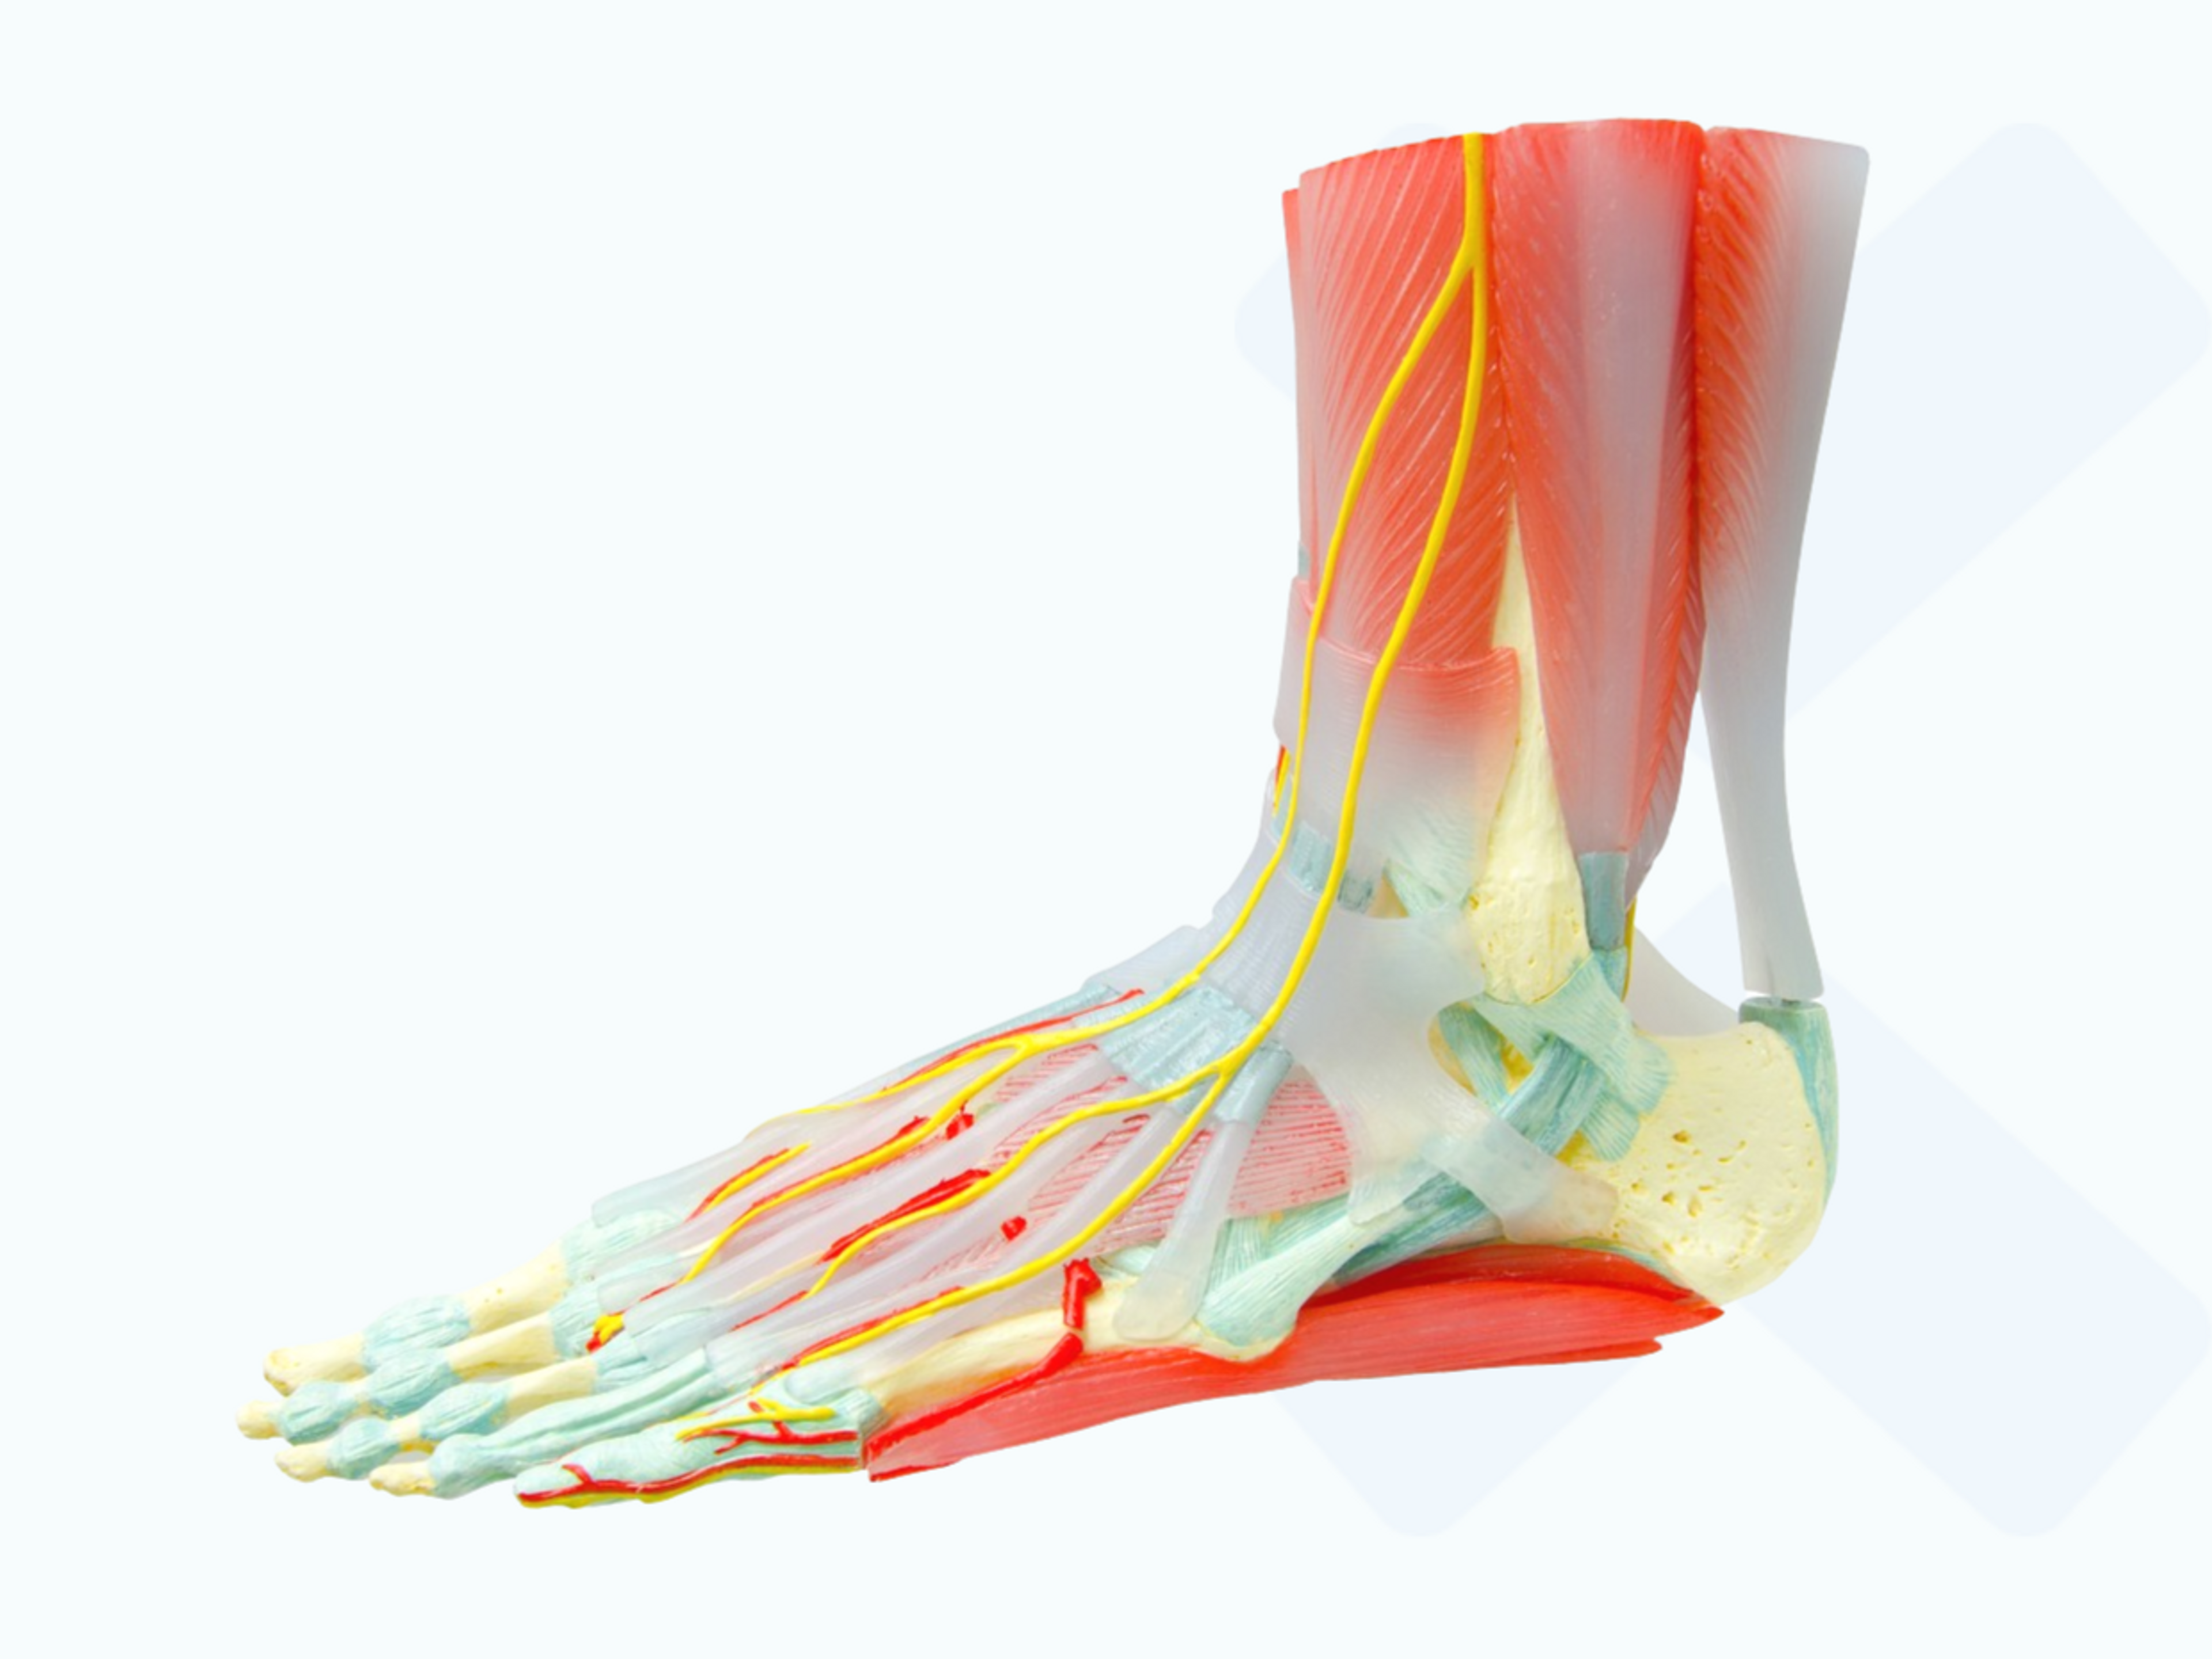 Several tendons cross the ankle joint, helping with its stability.